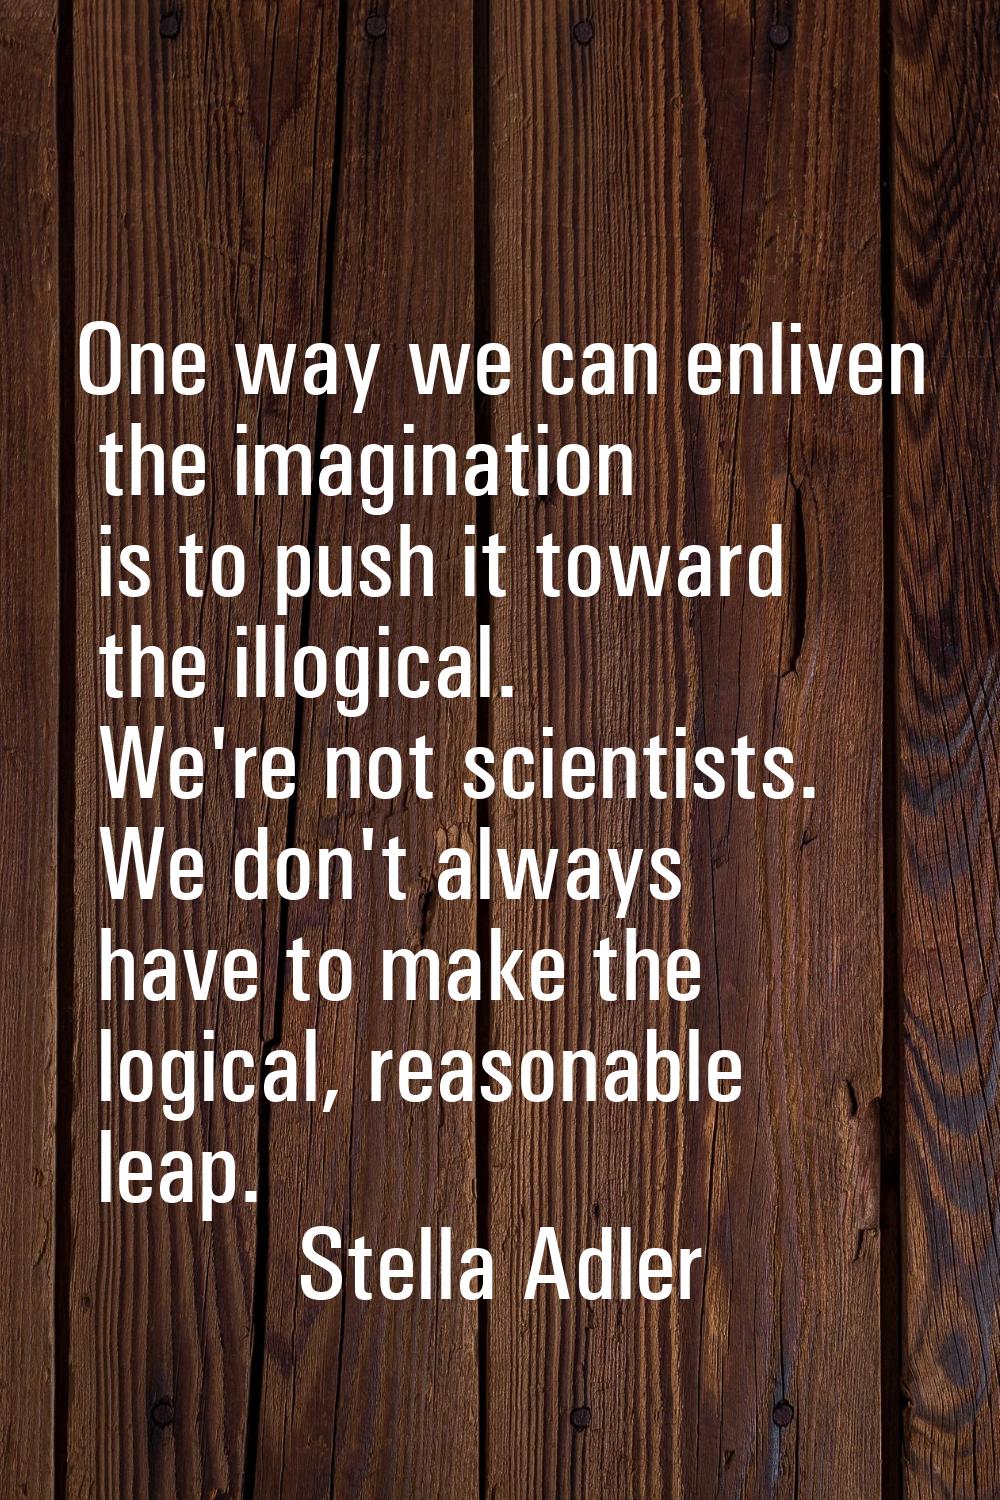 One way we can enliven the imagination is to push it toward the illogical. We're not scientists. We